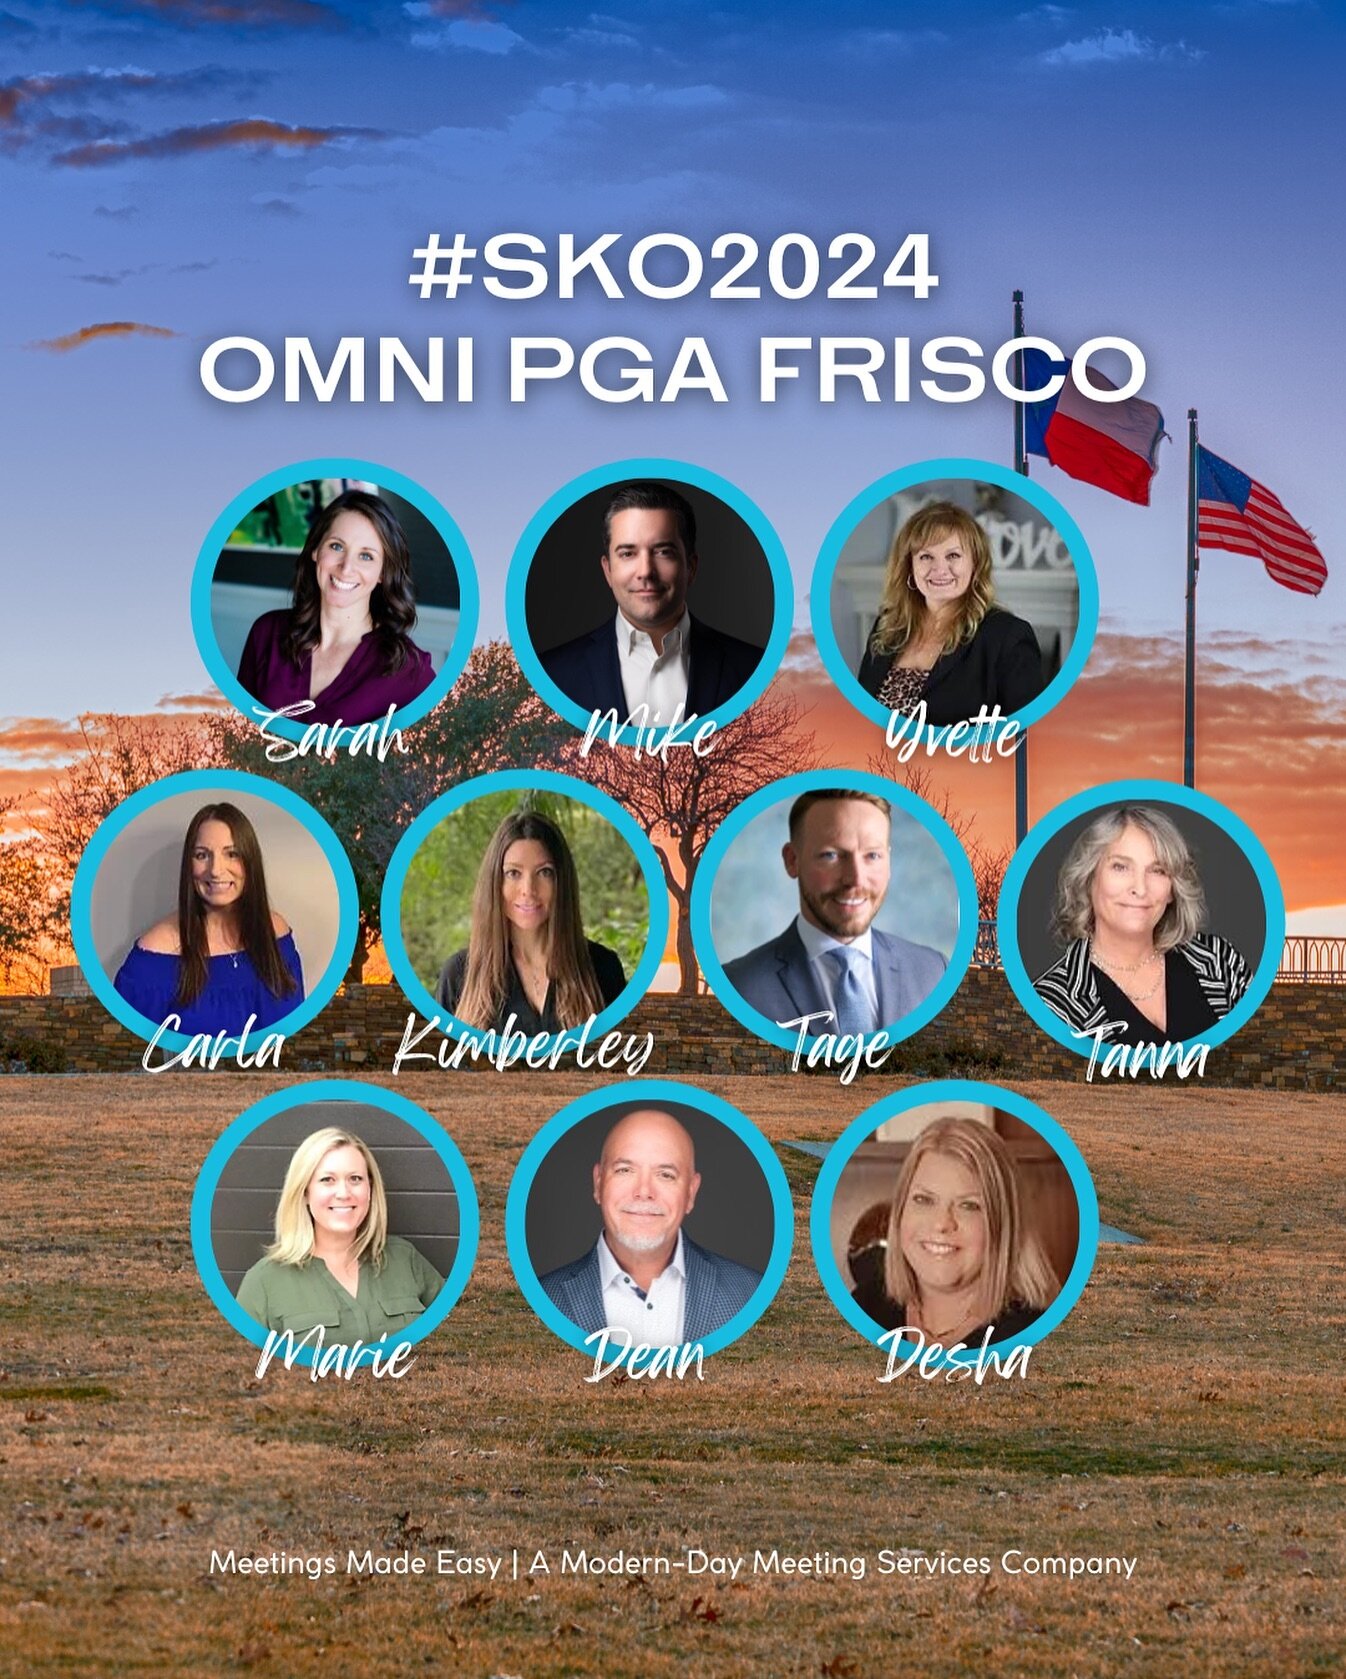 A new year means new goals! We&rsquo;re thrilled to kick off SKO2024 at the Omni PGA Frisco Resort this year 🤩

We can&rsquo;t wait to have our Meeting Broker brains together in one room. 2024 is a BIG year and we&rsquo;re planning accordingly.

Mak